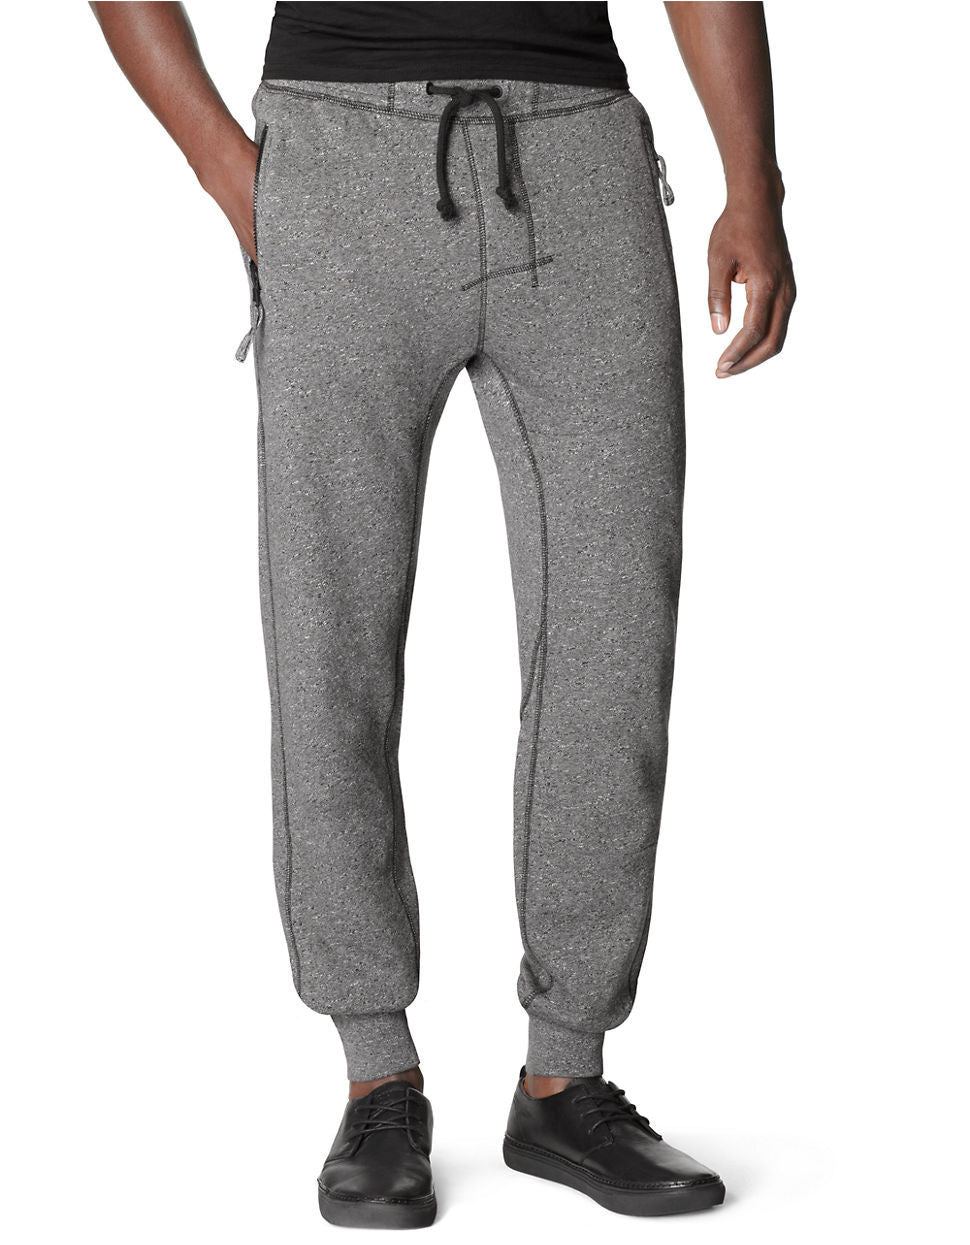  Calvin Klein Men's Active Trunk, Athletic Grey Heather :  Clothing, Shoes & Jewelry